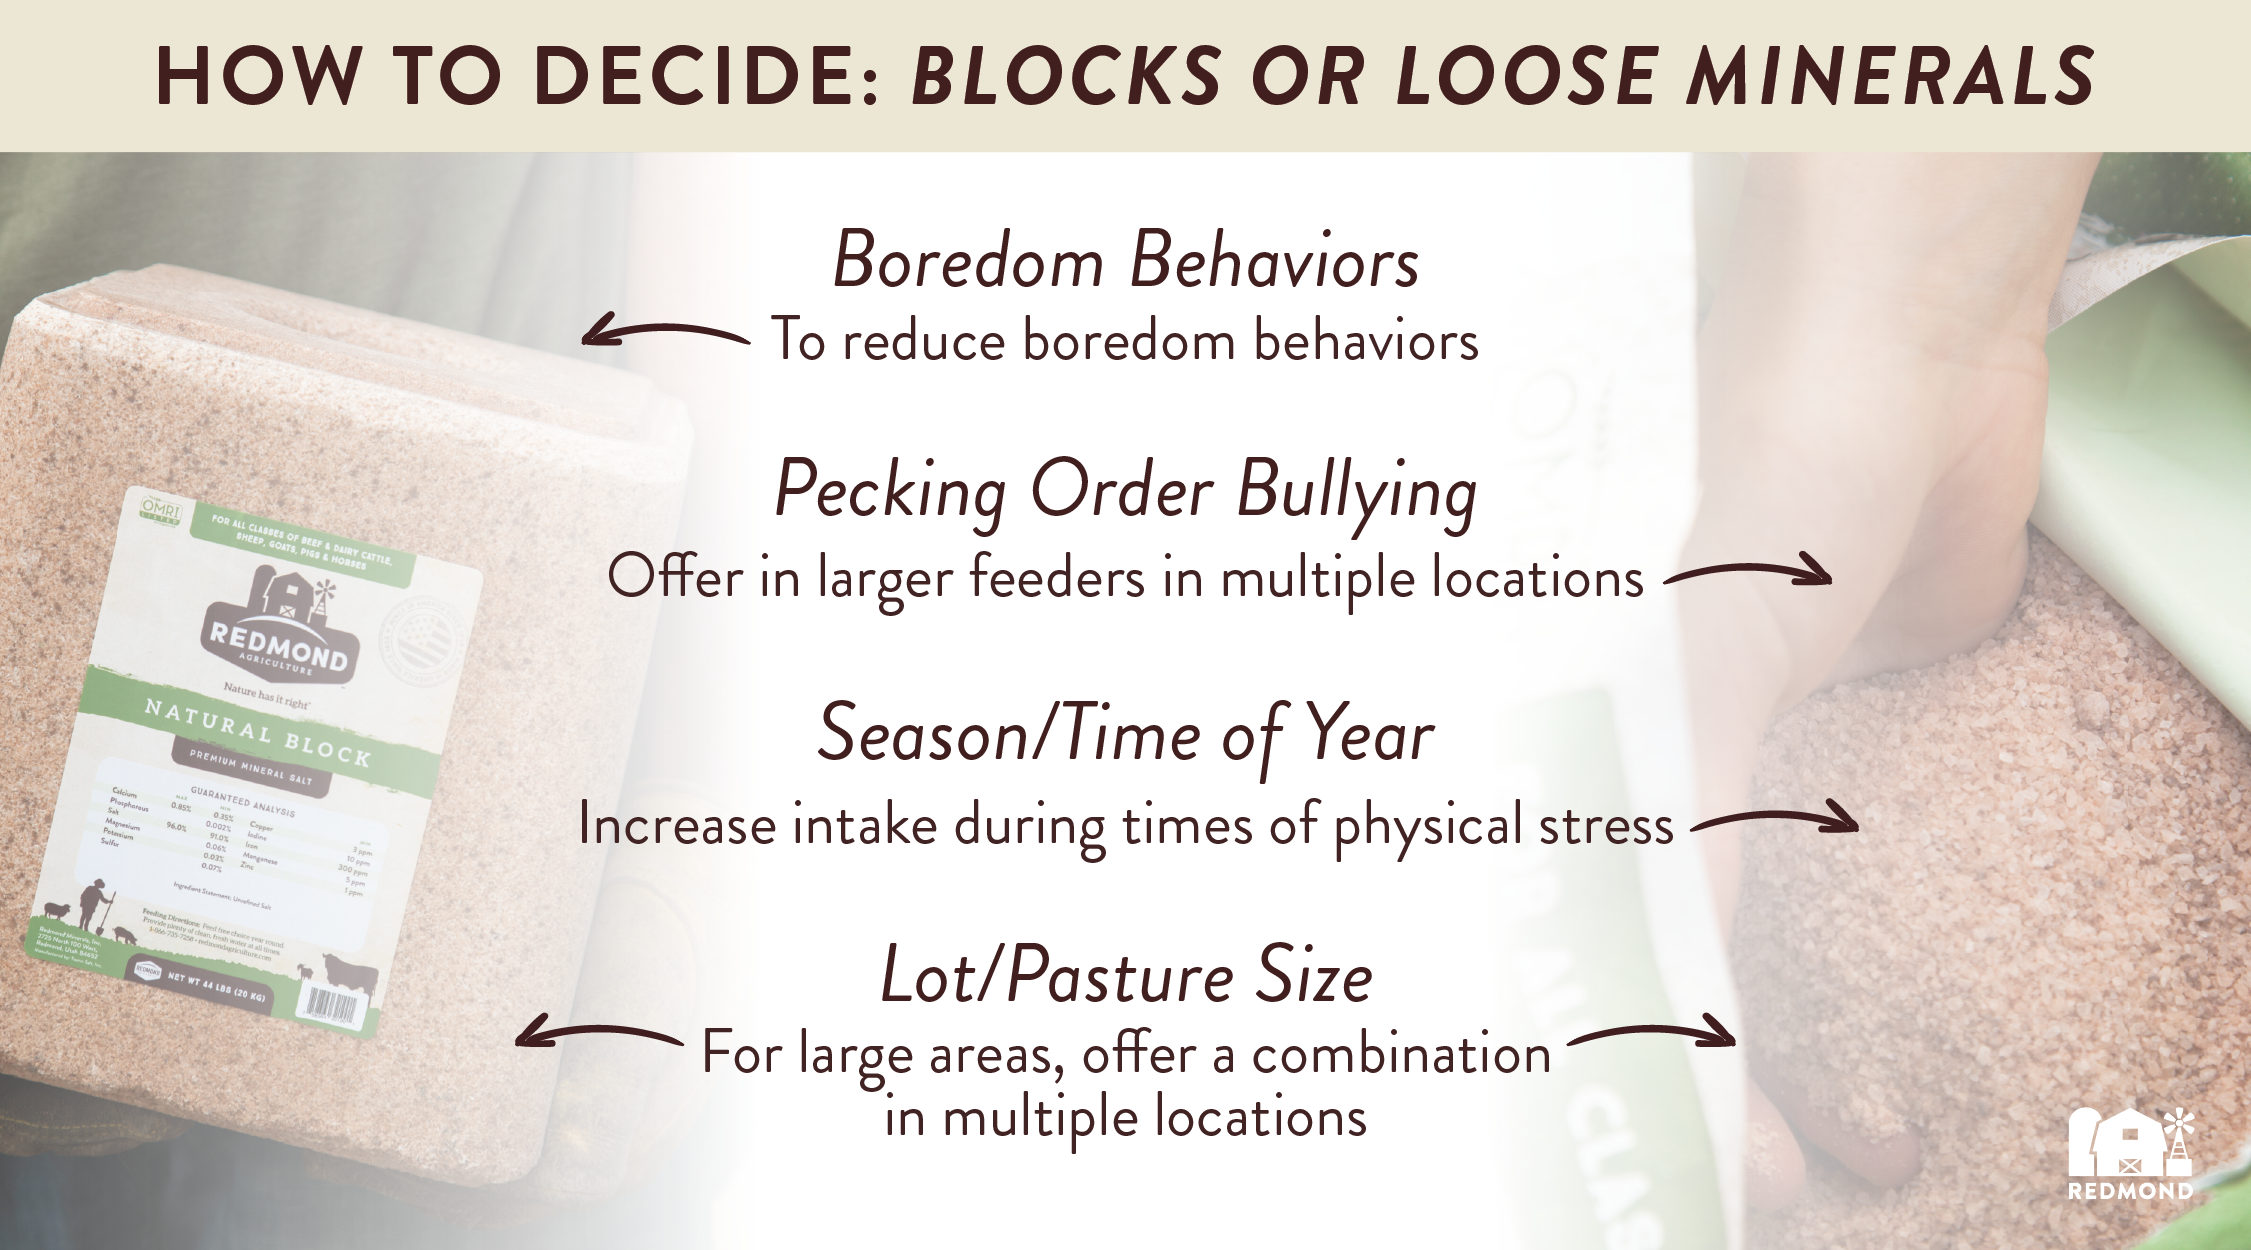 When should I use blocks or loose minerals